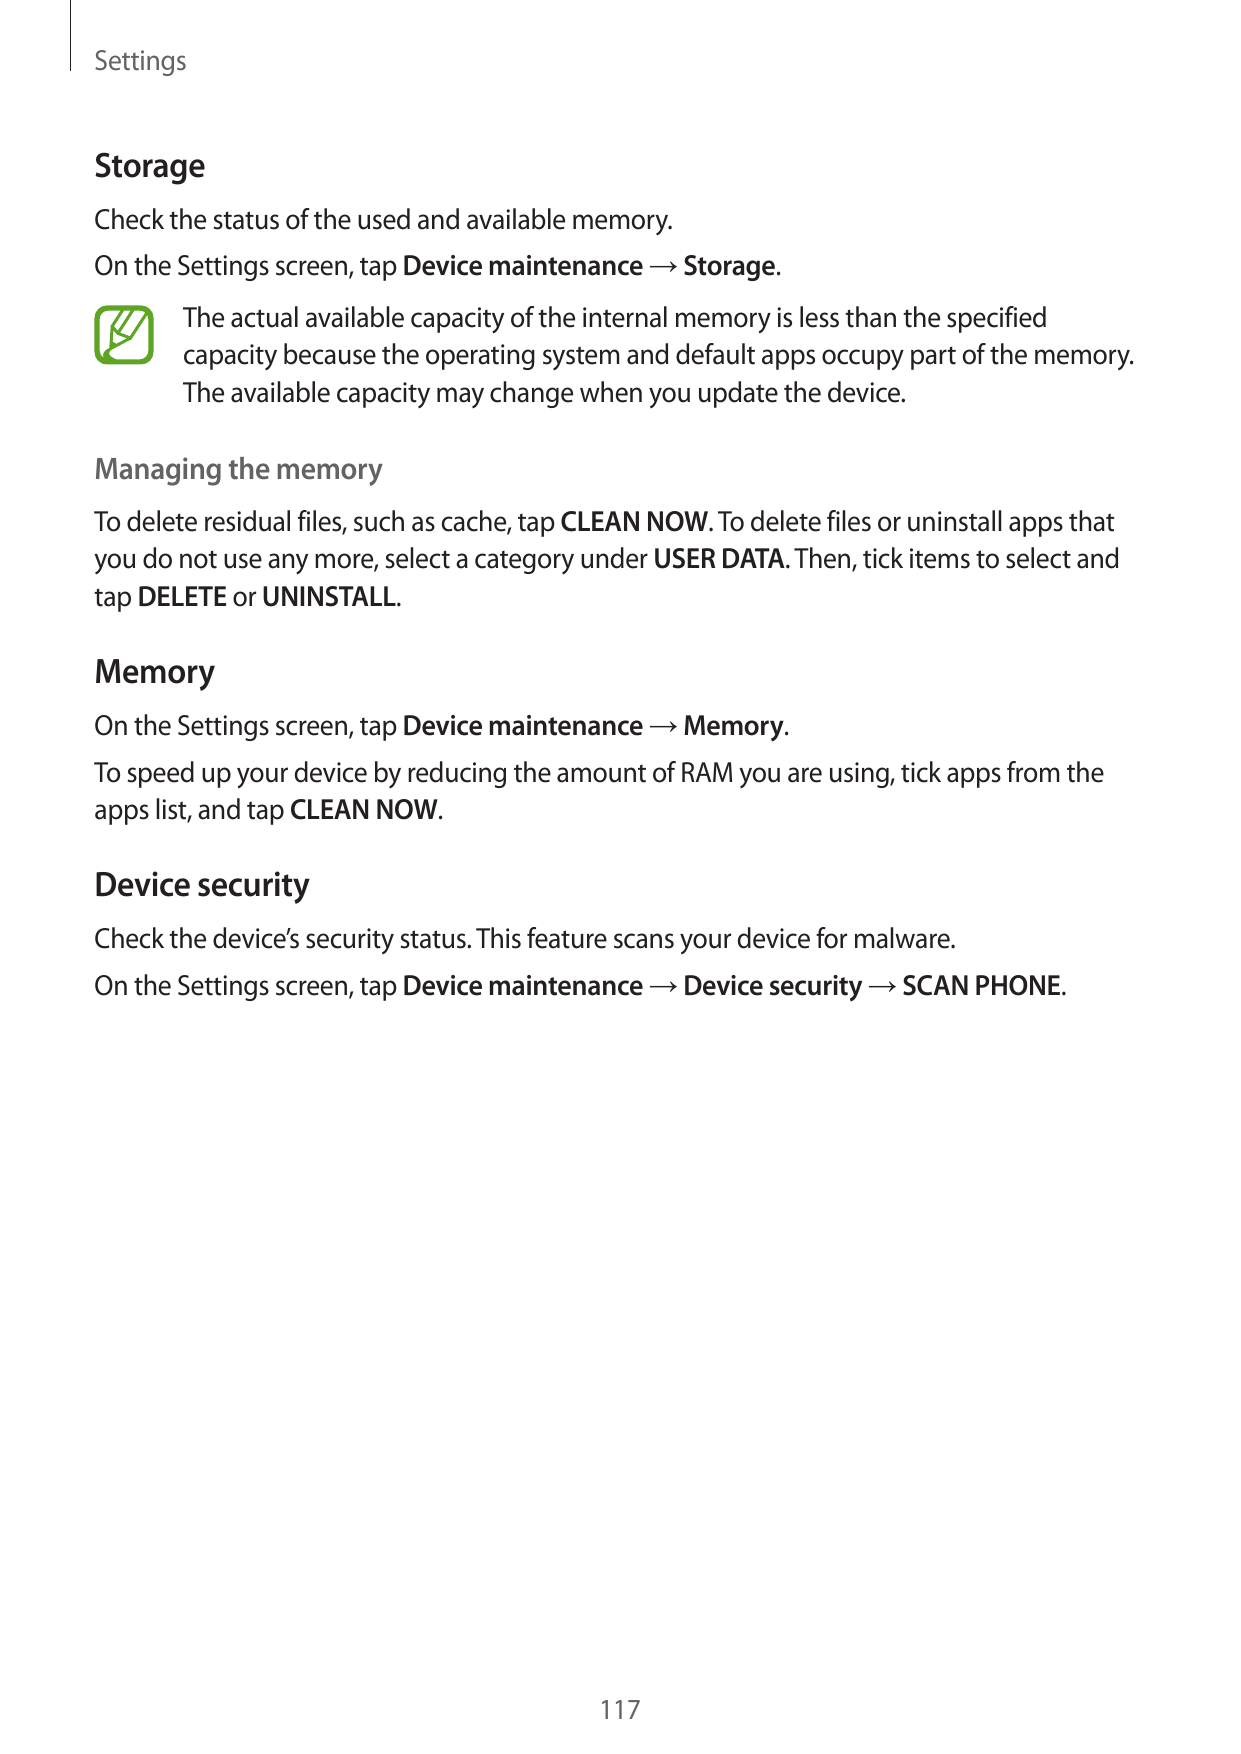 SettingsStorageCheck the status of the used and available memory.On the Settings screen, tap Device maintenance → Storage.The ac